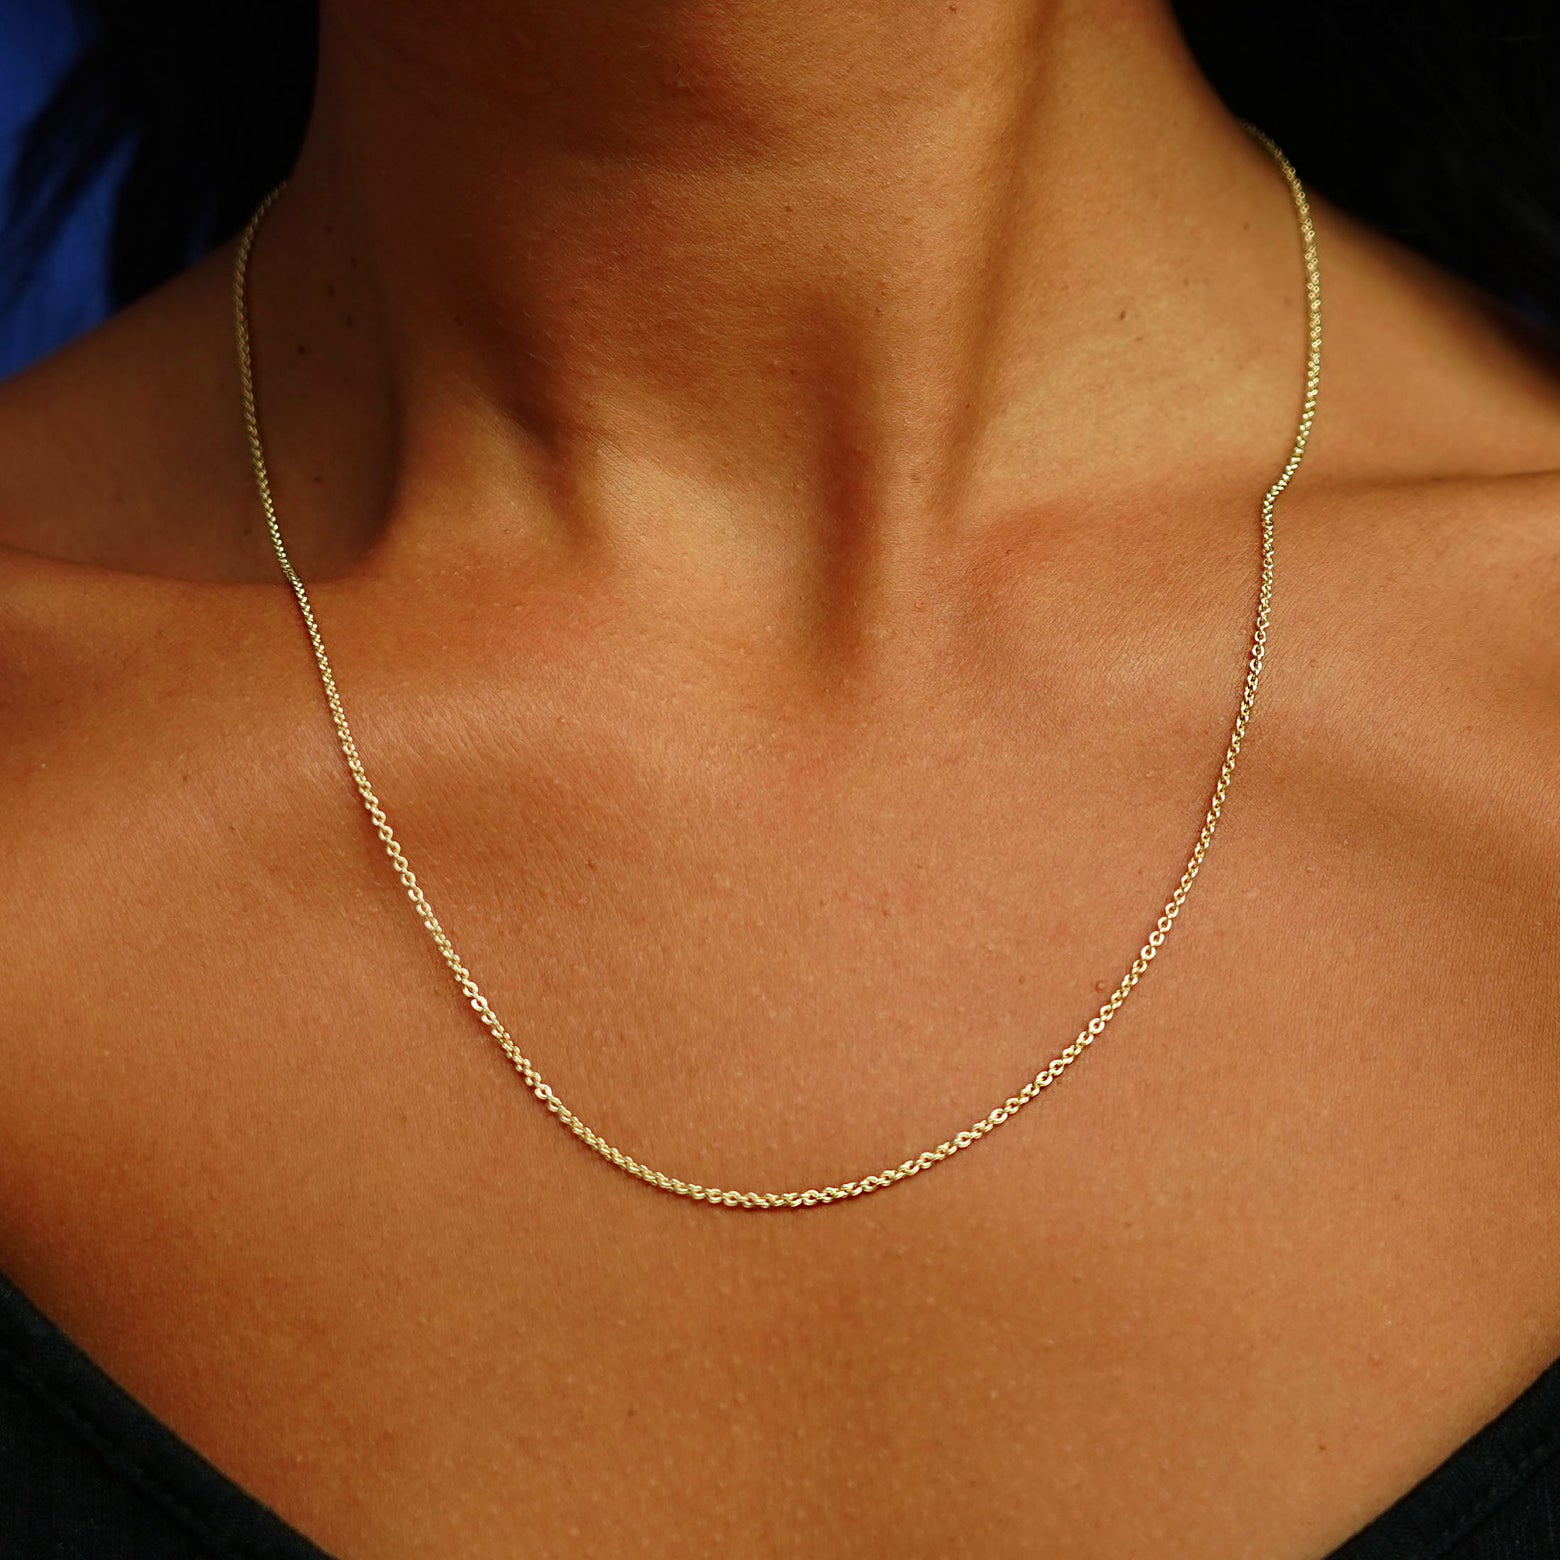 Close up view of a model's neck wearing a solid 14k yellow gold Thick Cable Chain